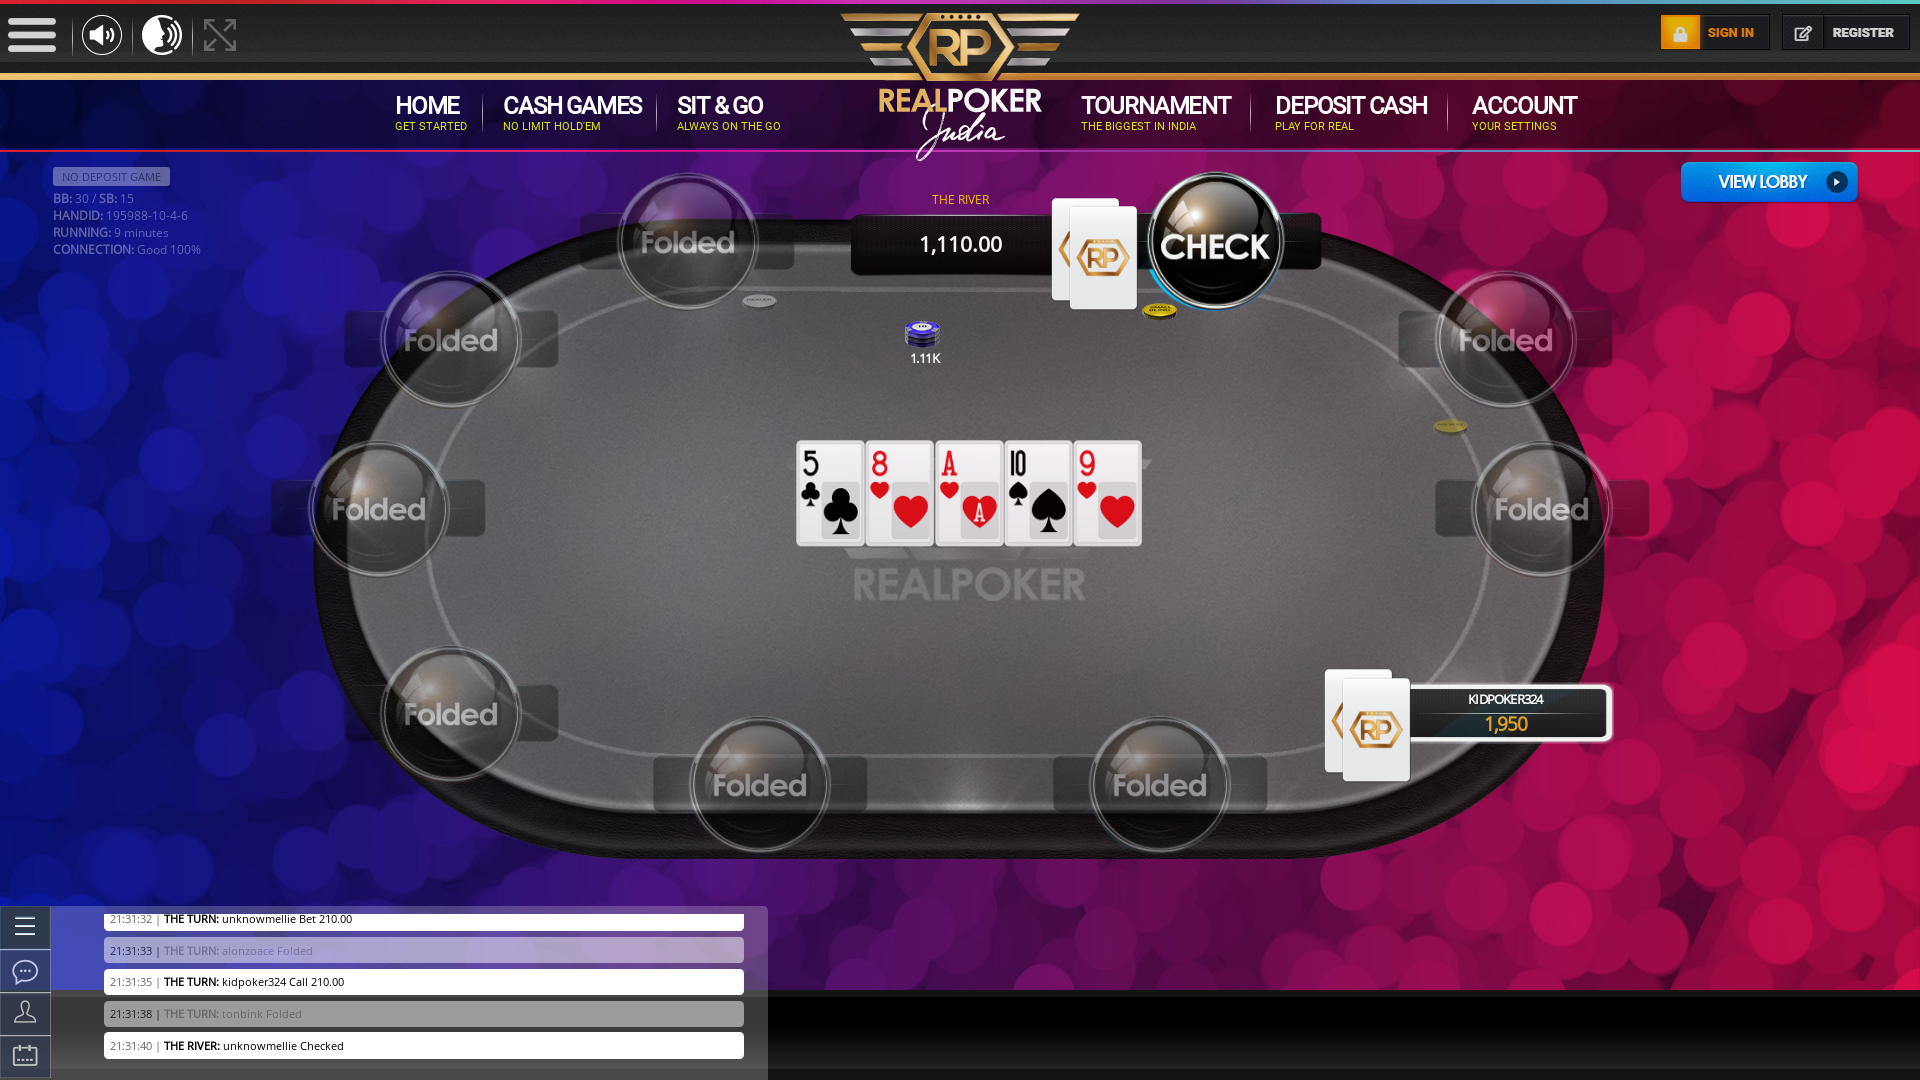 Indian 10 player poker in the 9th minute